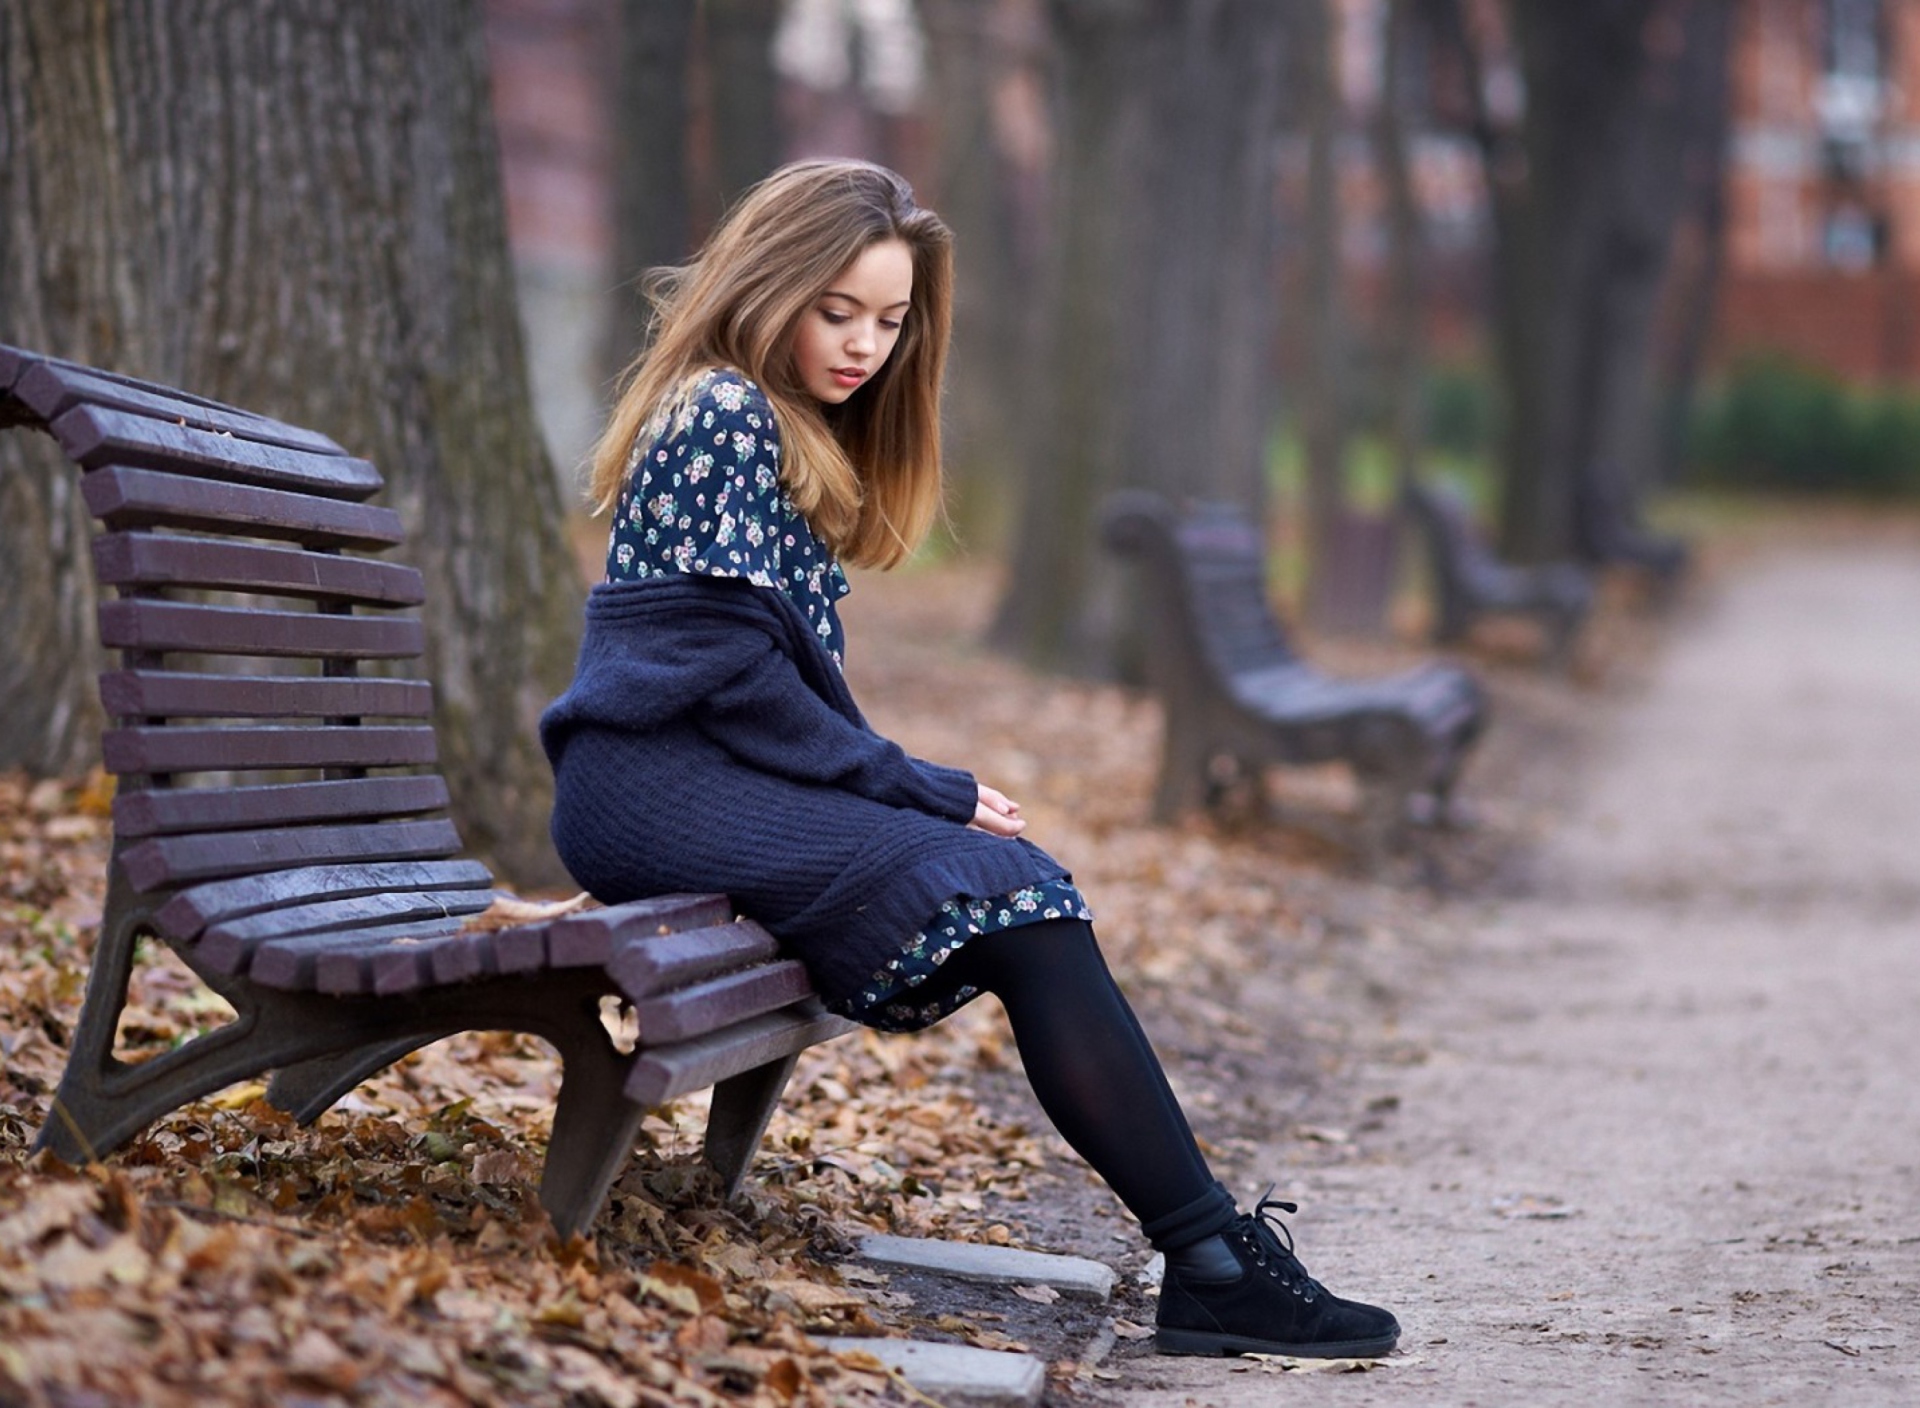 Beautiful Girl Sitting On Bench In Autumn Park wallpaper 1920x1408